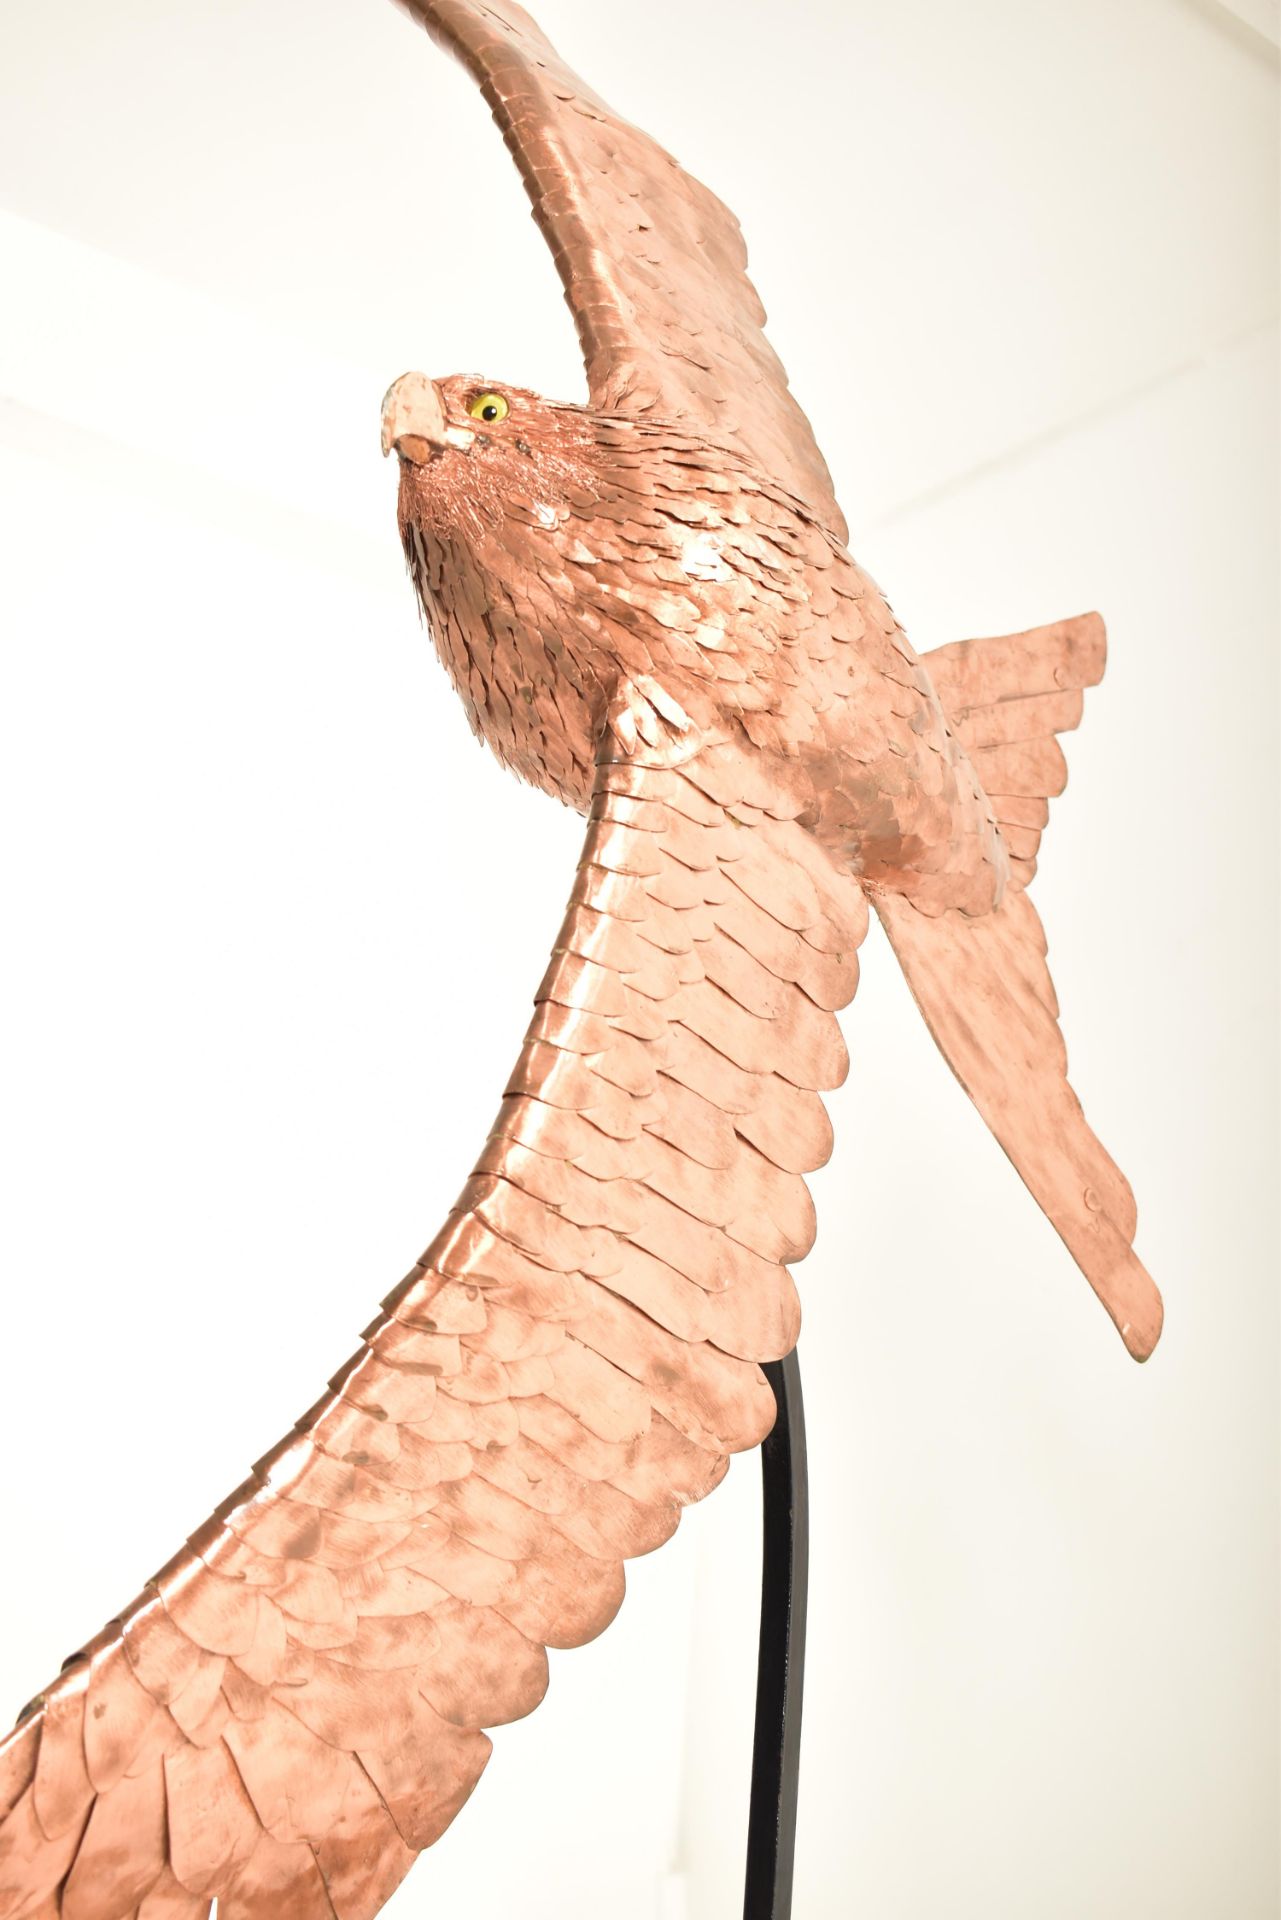 BOB ROWLEY - CONTEMPORARY COPPER WORKED RED KITE SCULPTURE - Image 5 of 6